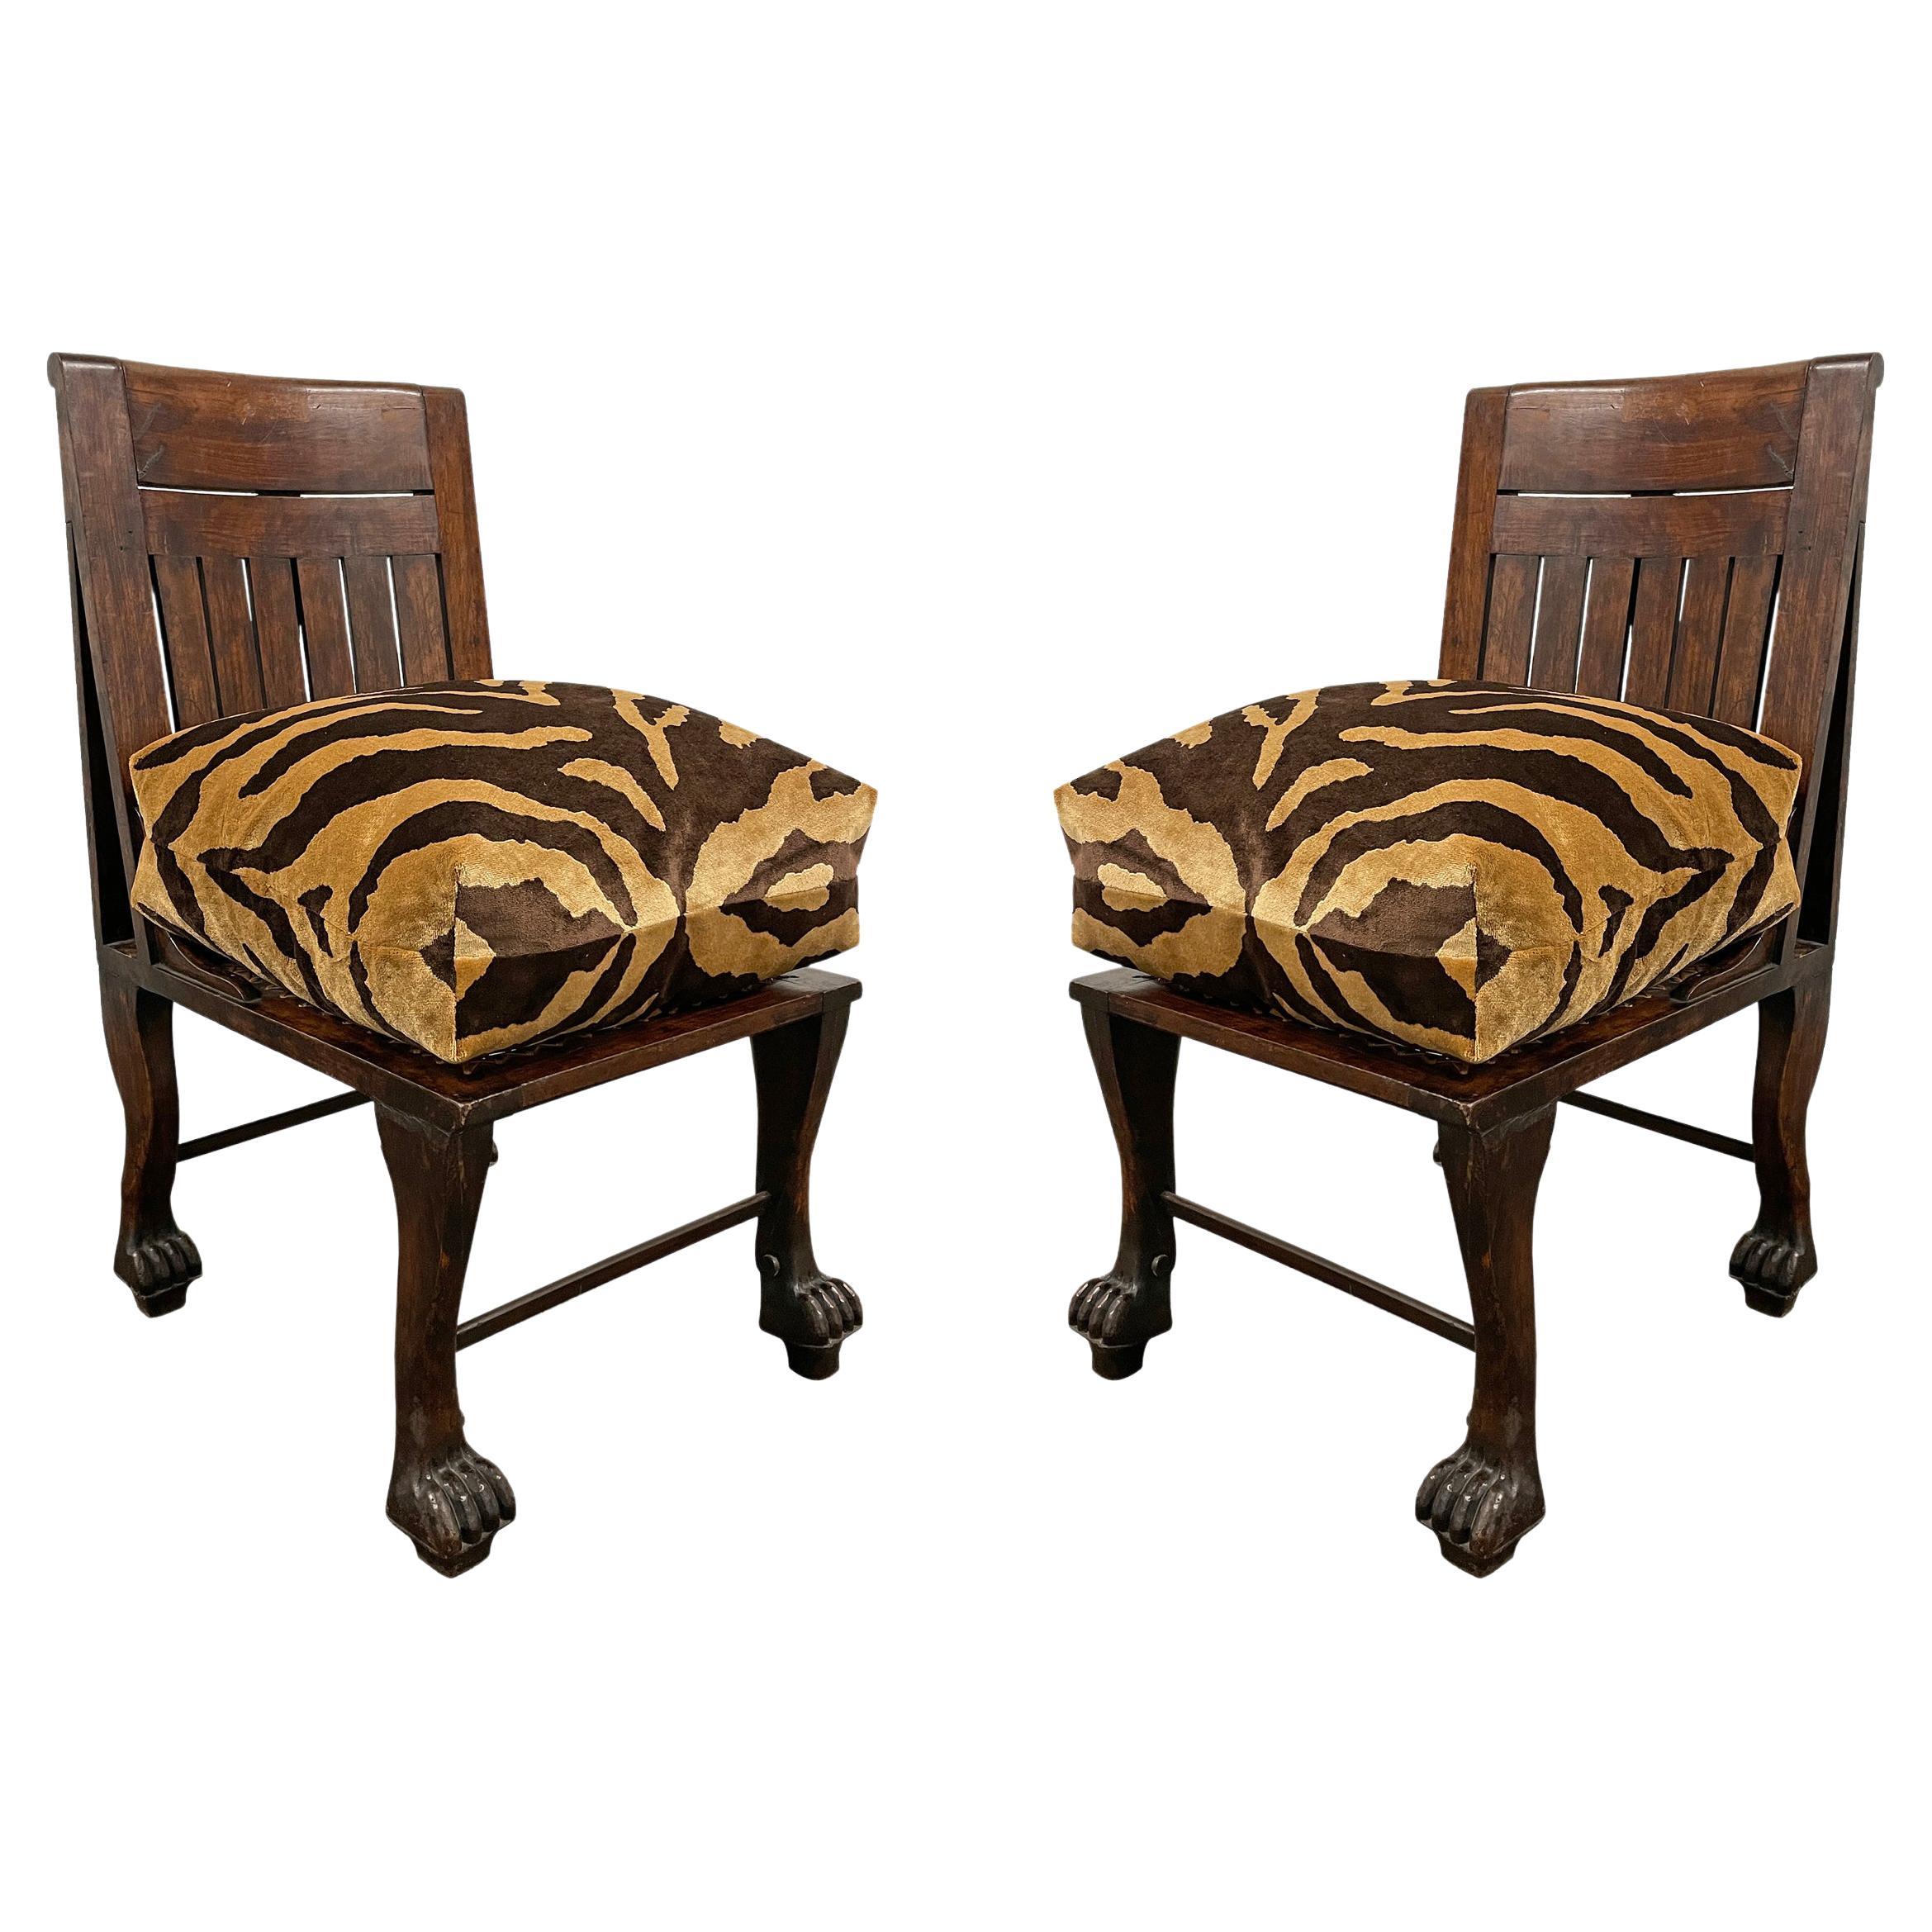 Pair of Early 20th Century English Egyptian Revival Chairs